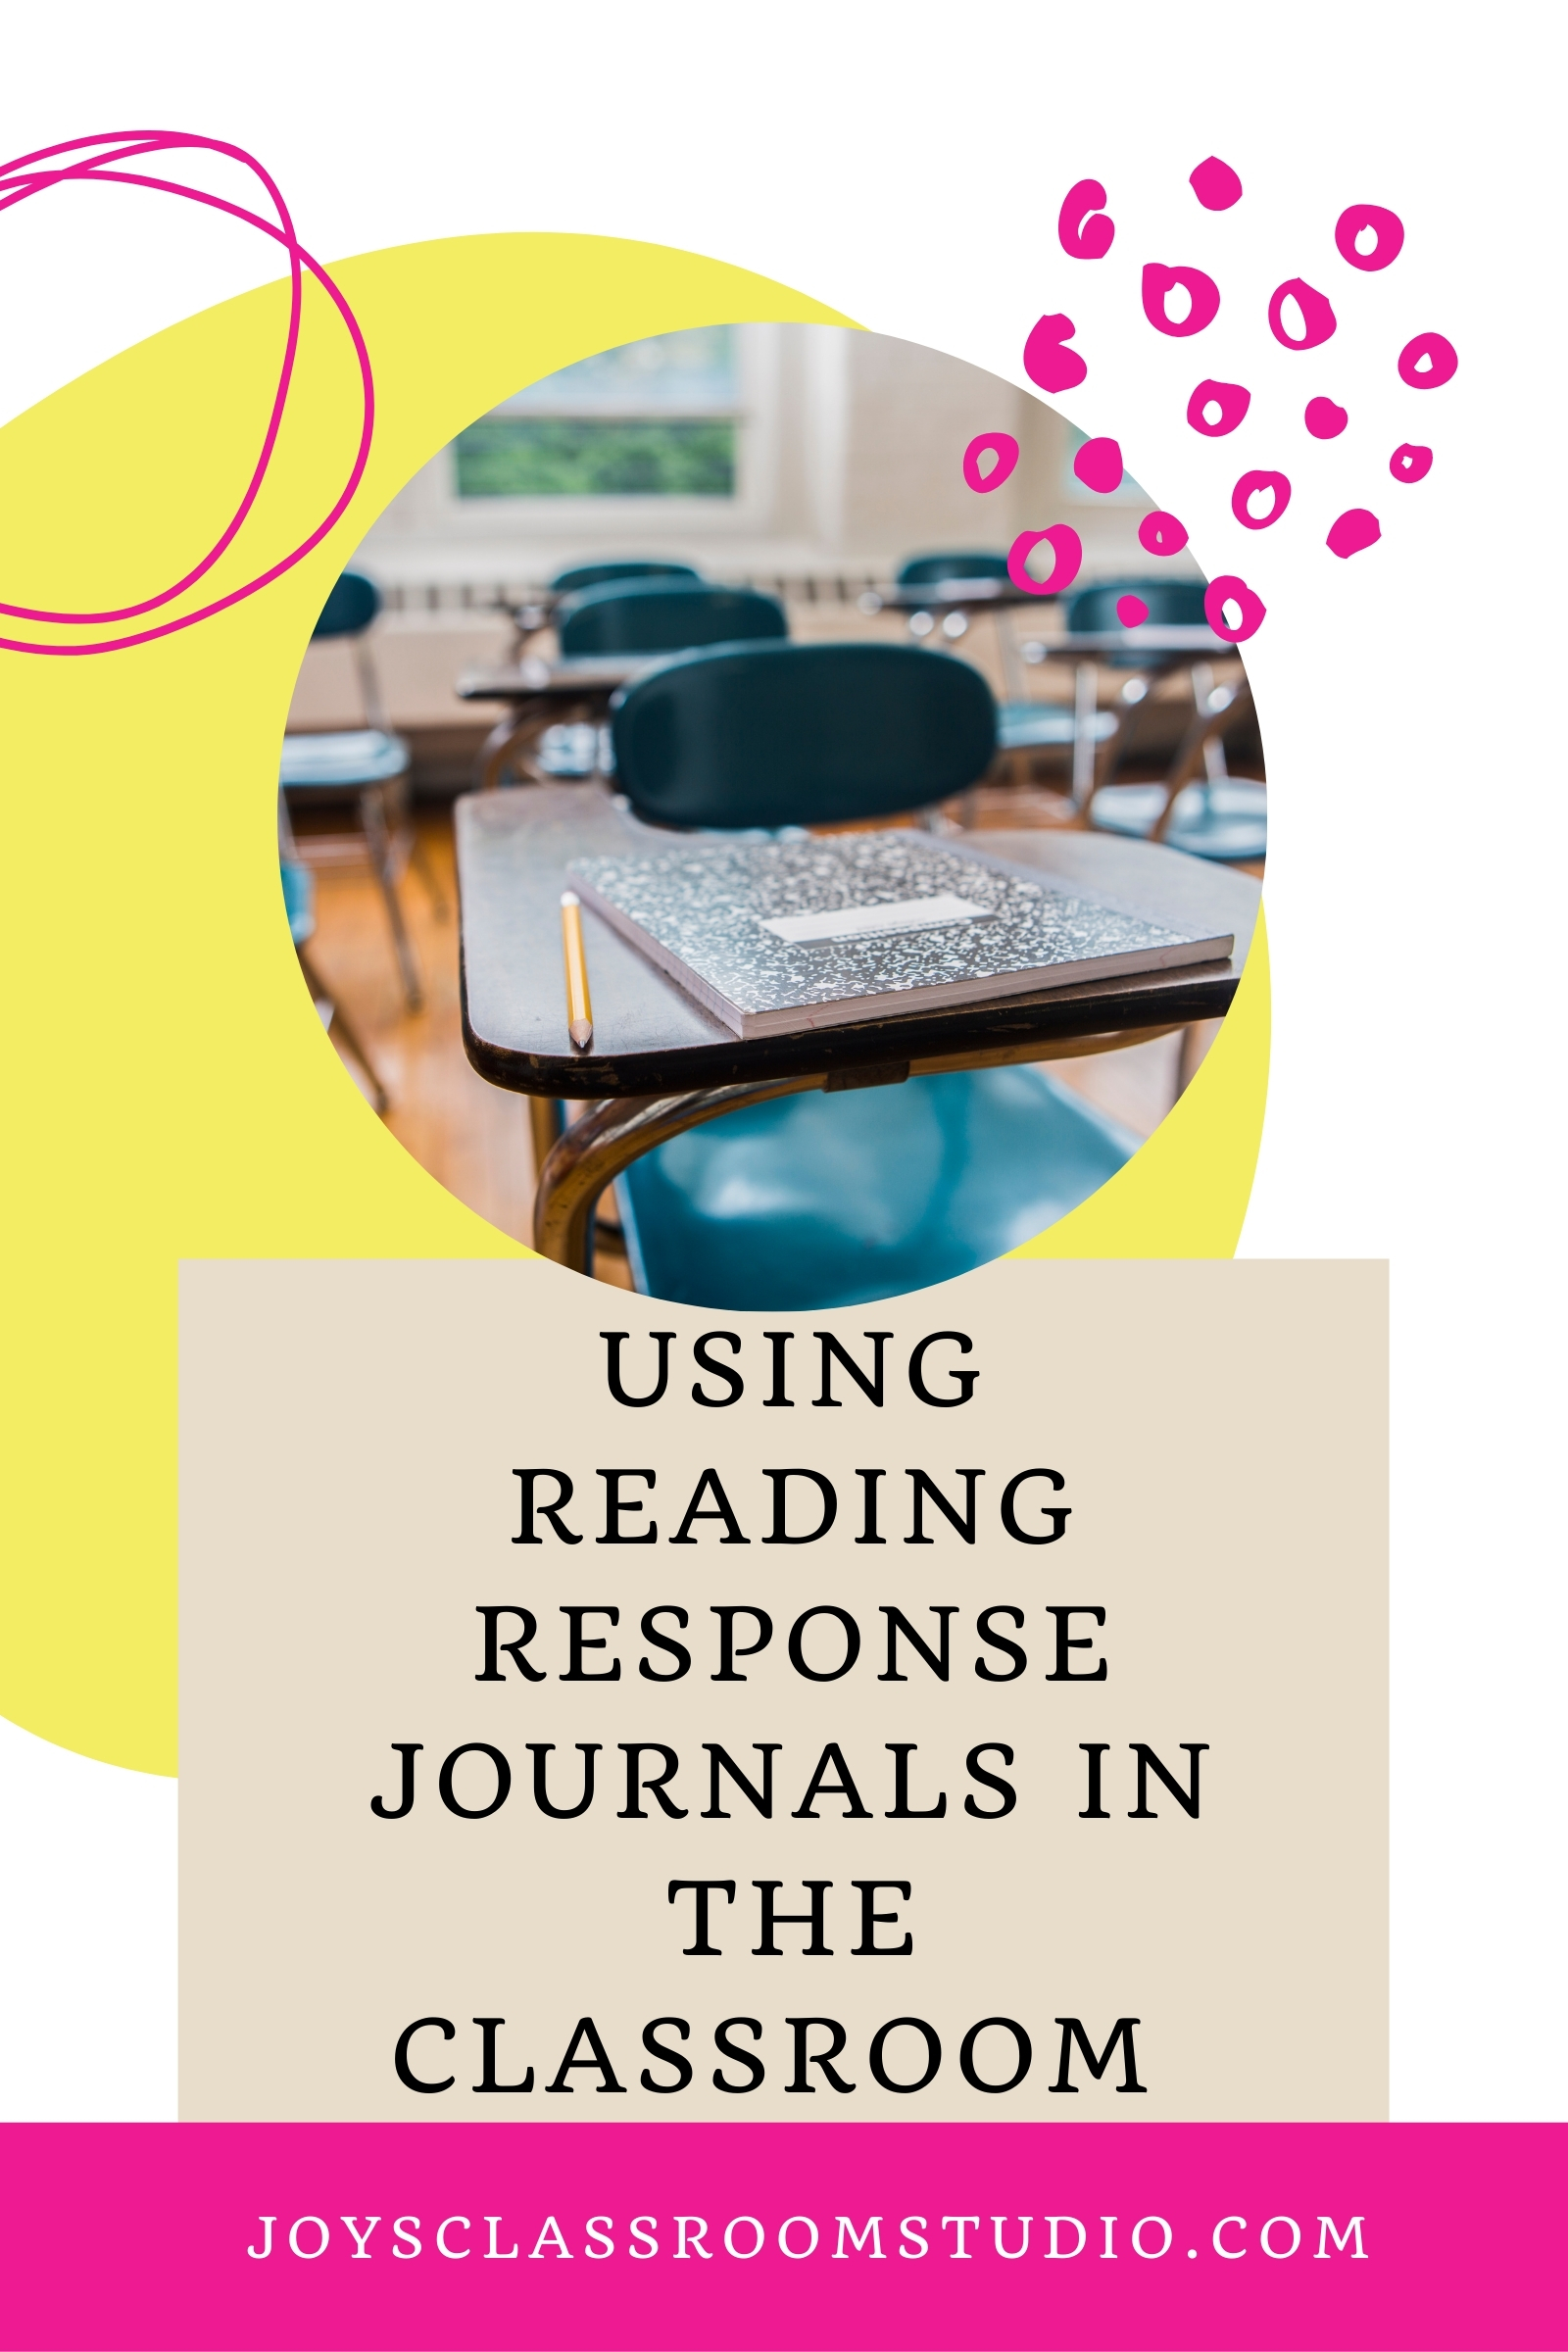 Using Reading Reading Response Journals in the Classroom